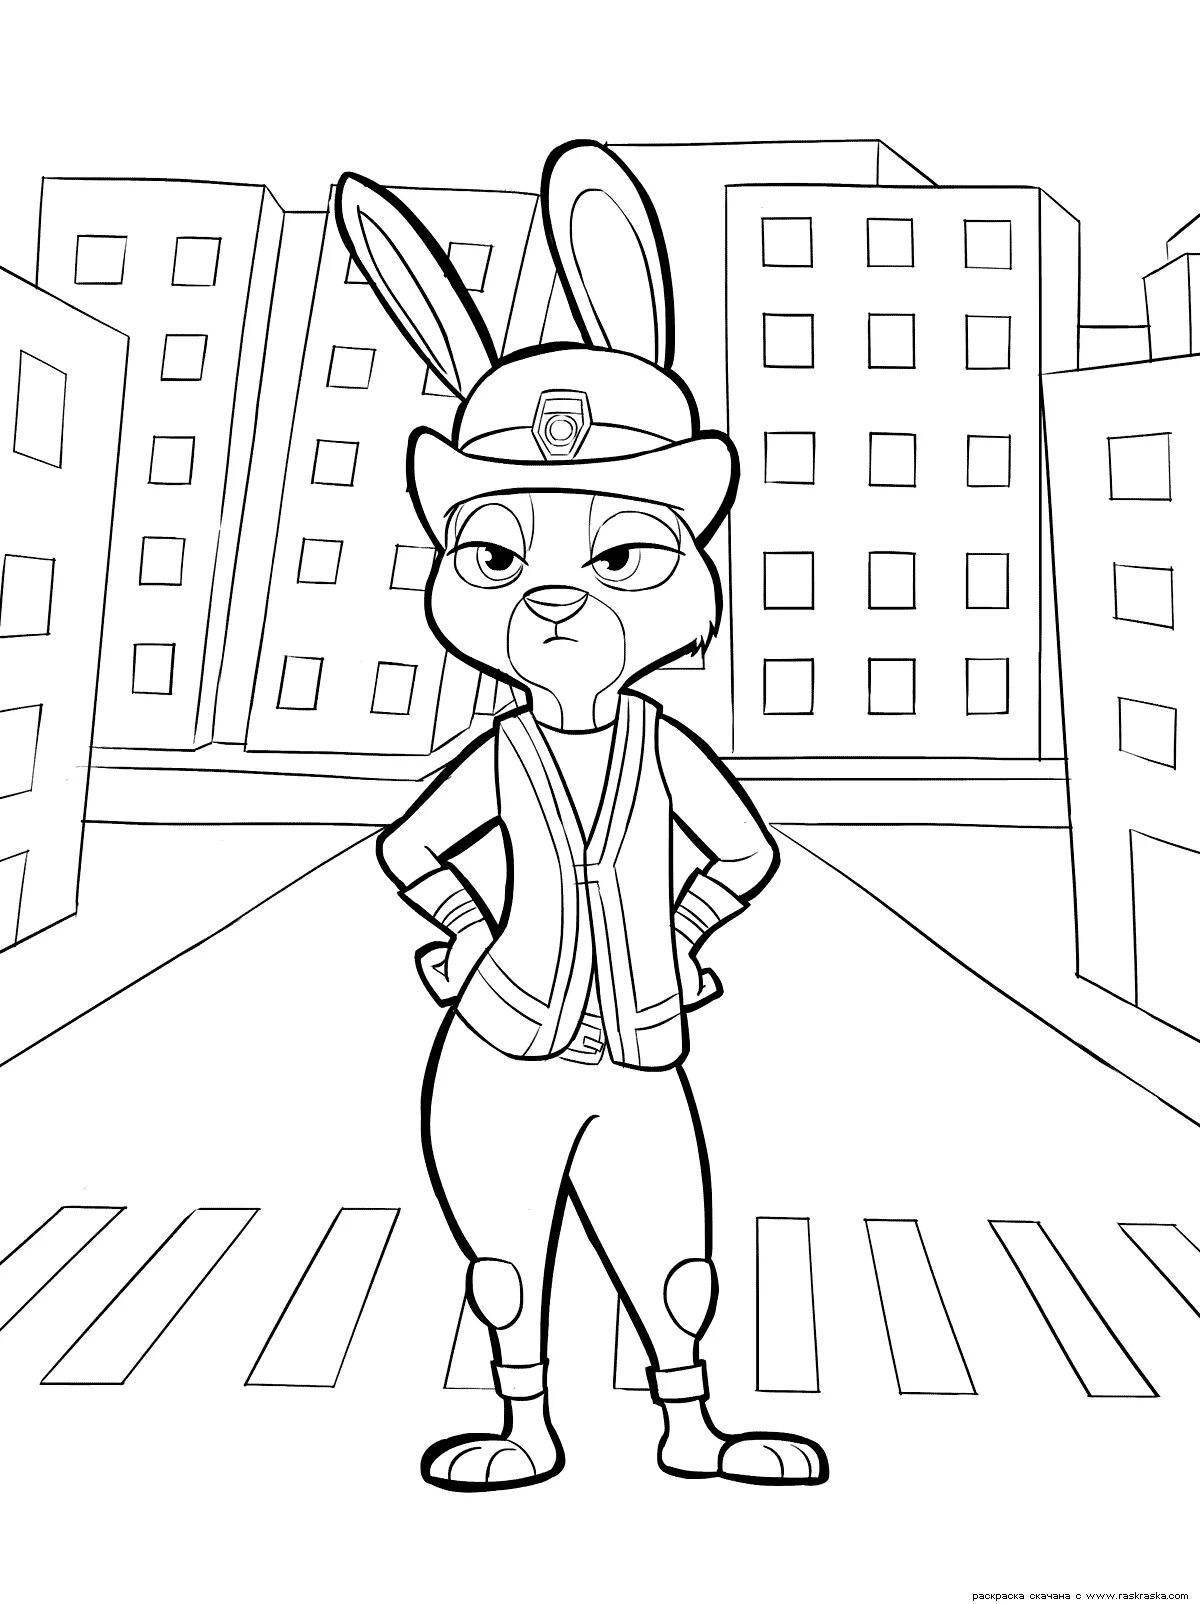 Coloring page playful mr hobbs